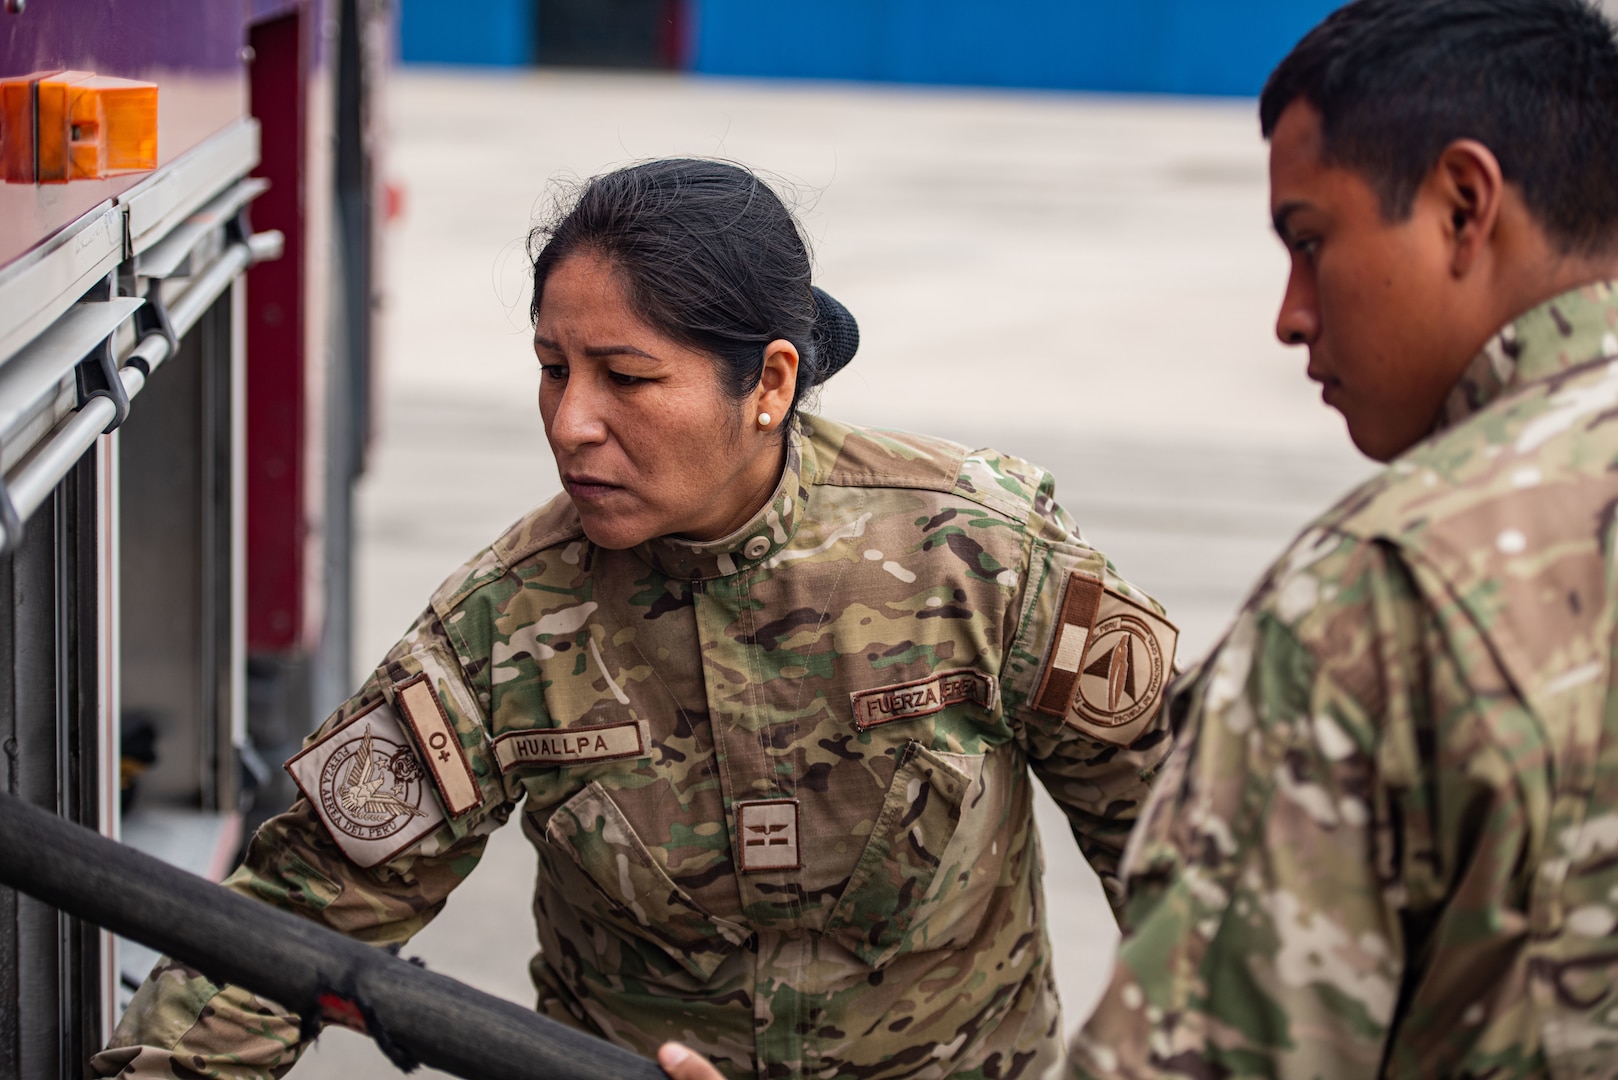 A Peruvian firefighter wraps up a hose during Resolute Sentinel 2024 in Lima, Peru, June 3, 2024. Exercise RS24 is an opportunity for cultural and tactical integration between the U.S. and its allied Latin American nations. (U.S. Air force photo by Airman 1st Class Sir Wyrick)